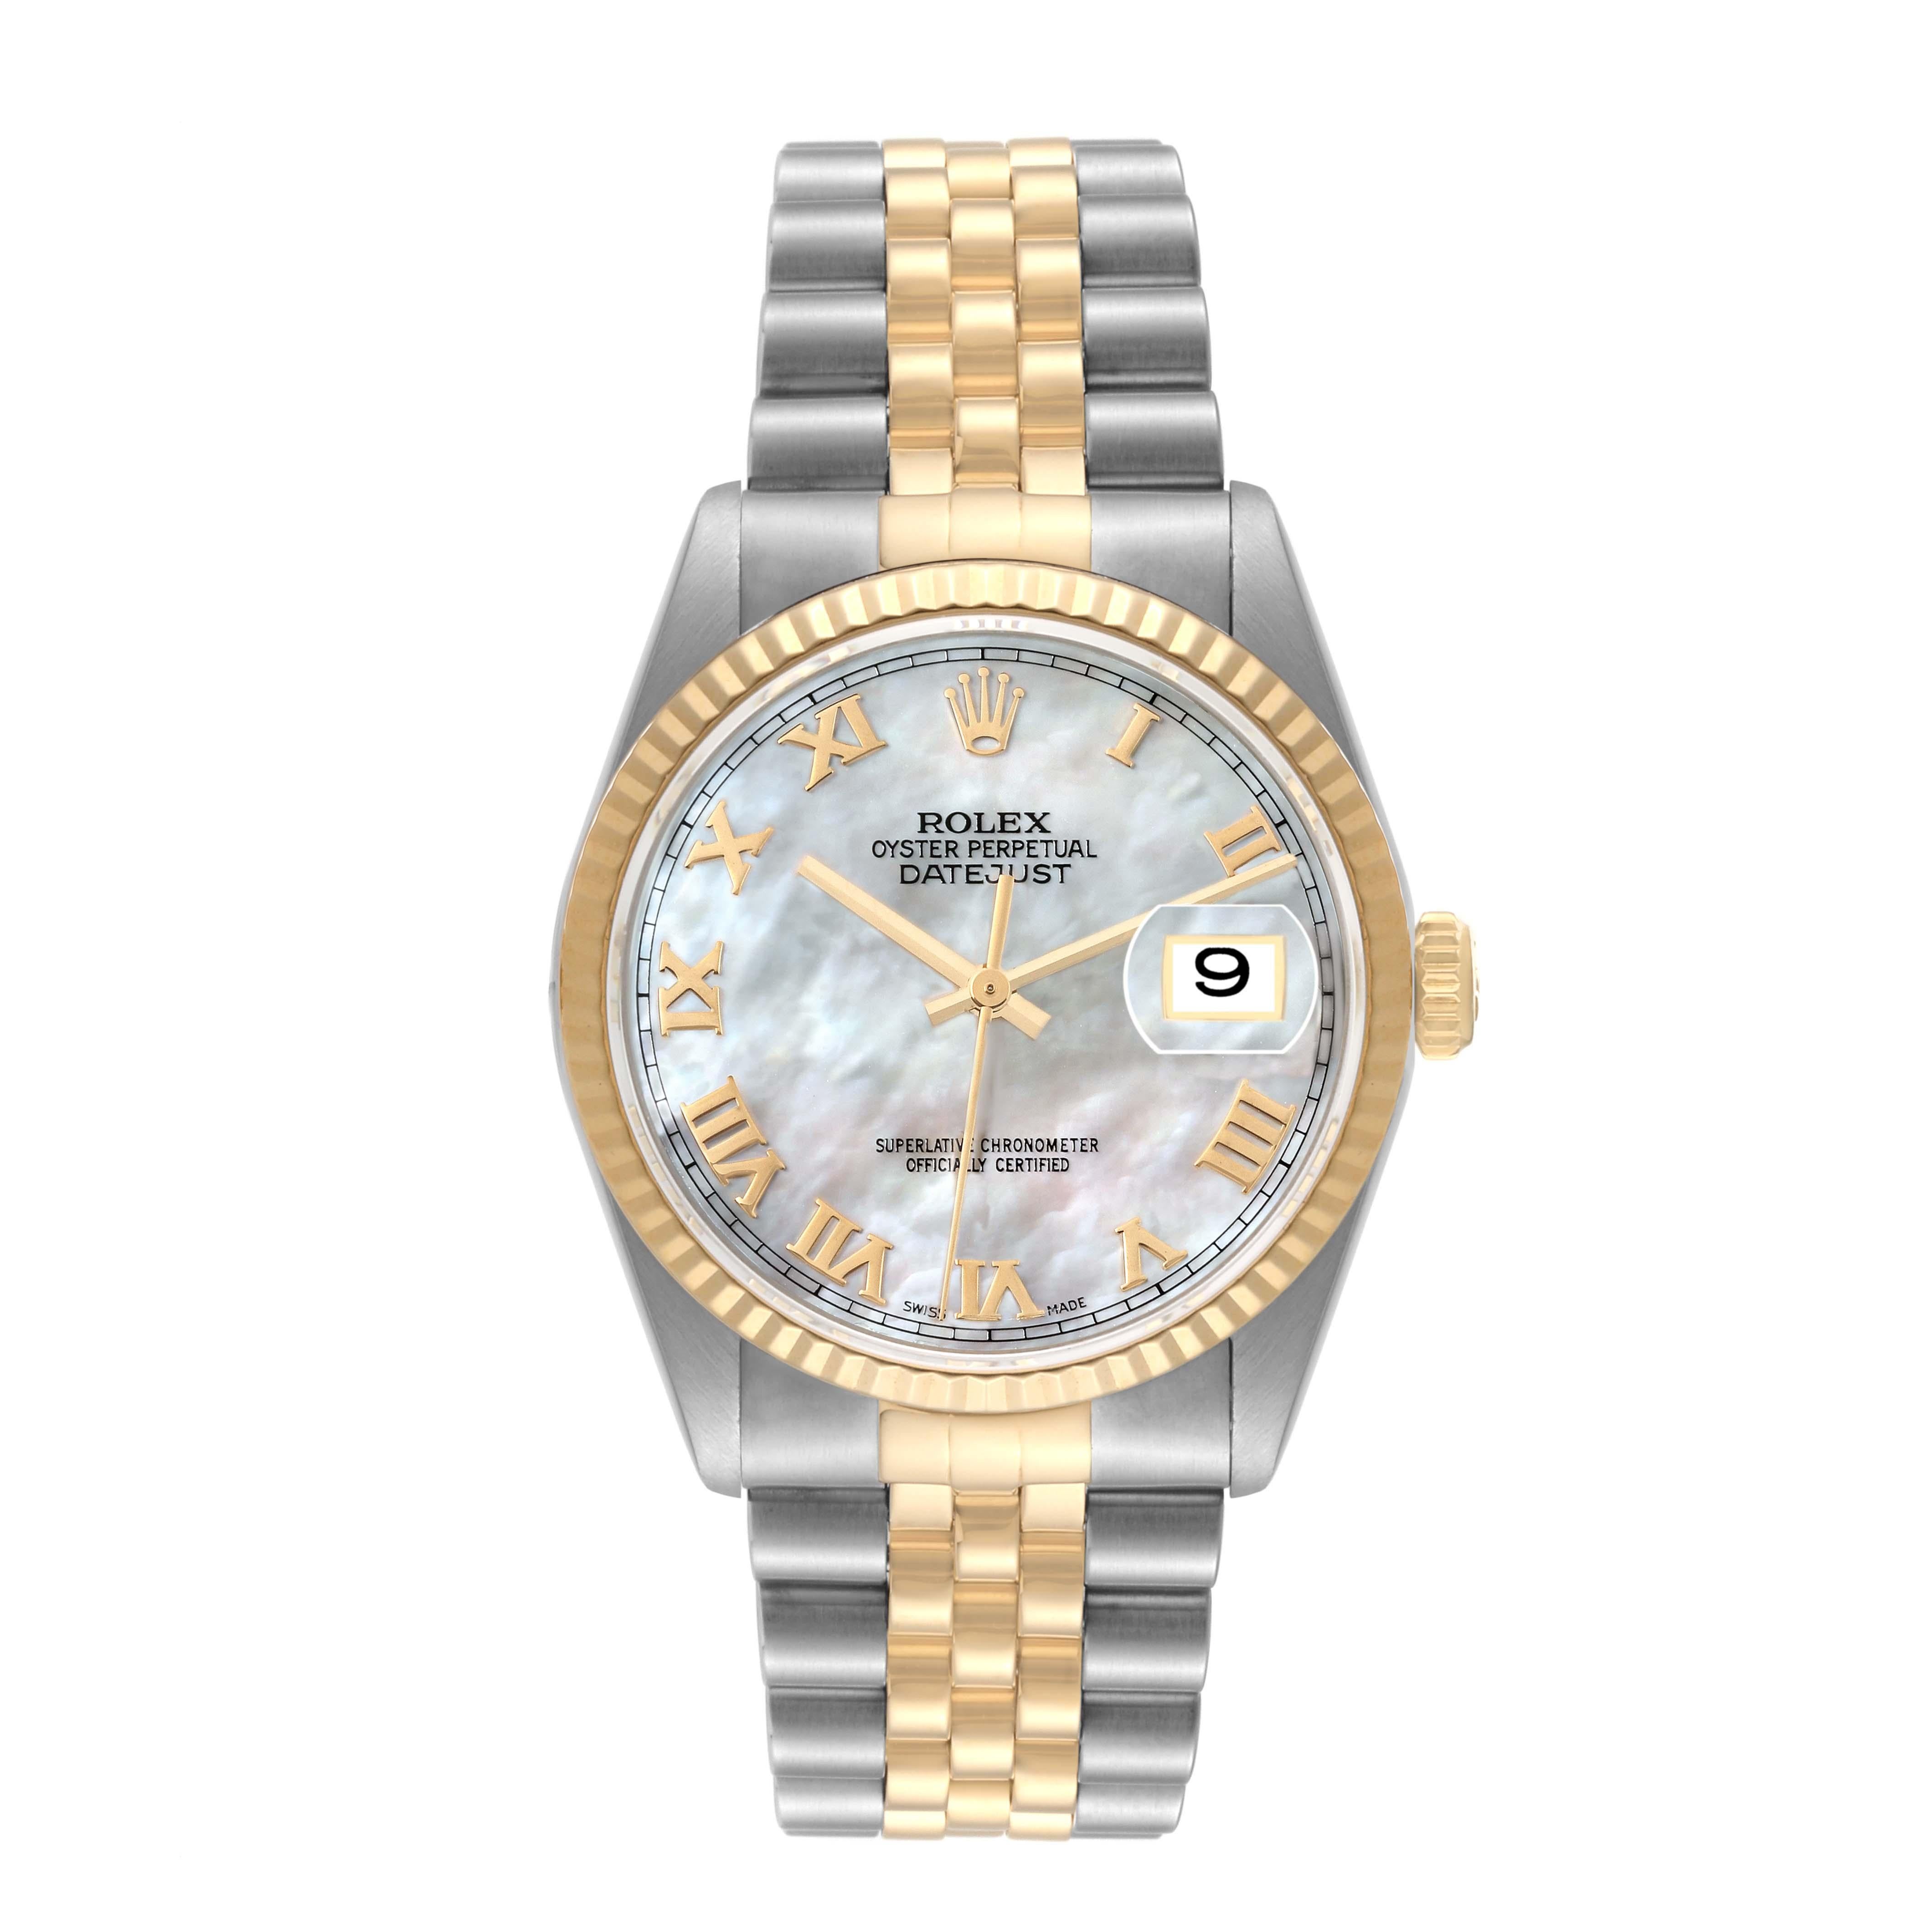 Rolex Datejust Steel Yellow Gold Mother of Pearl Dial Mens Watch 16233. Officially certified chronometer automatic self-winding movement. Stainless steel case 36 mm in diameter.  Rolex logo on an 18K yellow gold crown. 18k yellow gold fluted bezel.